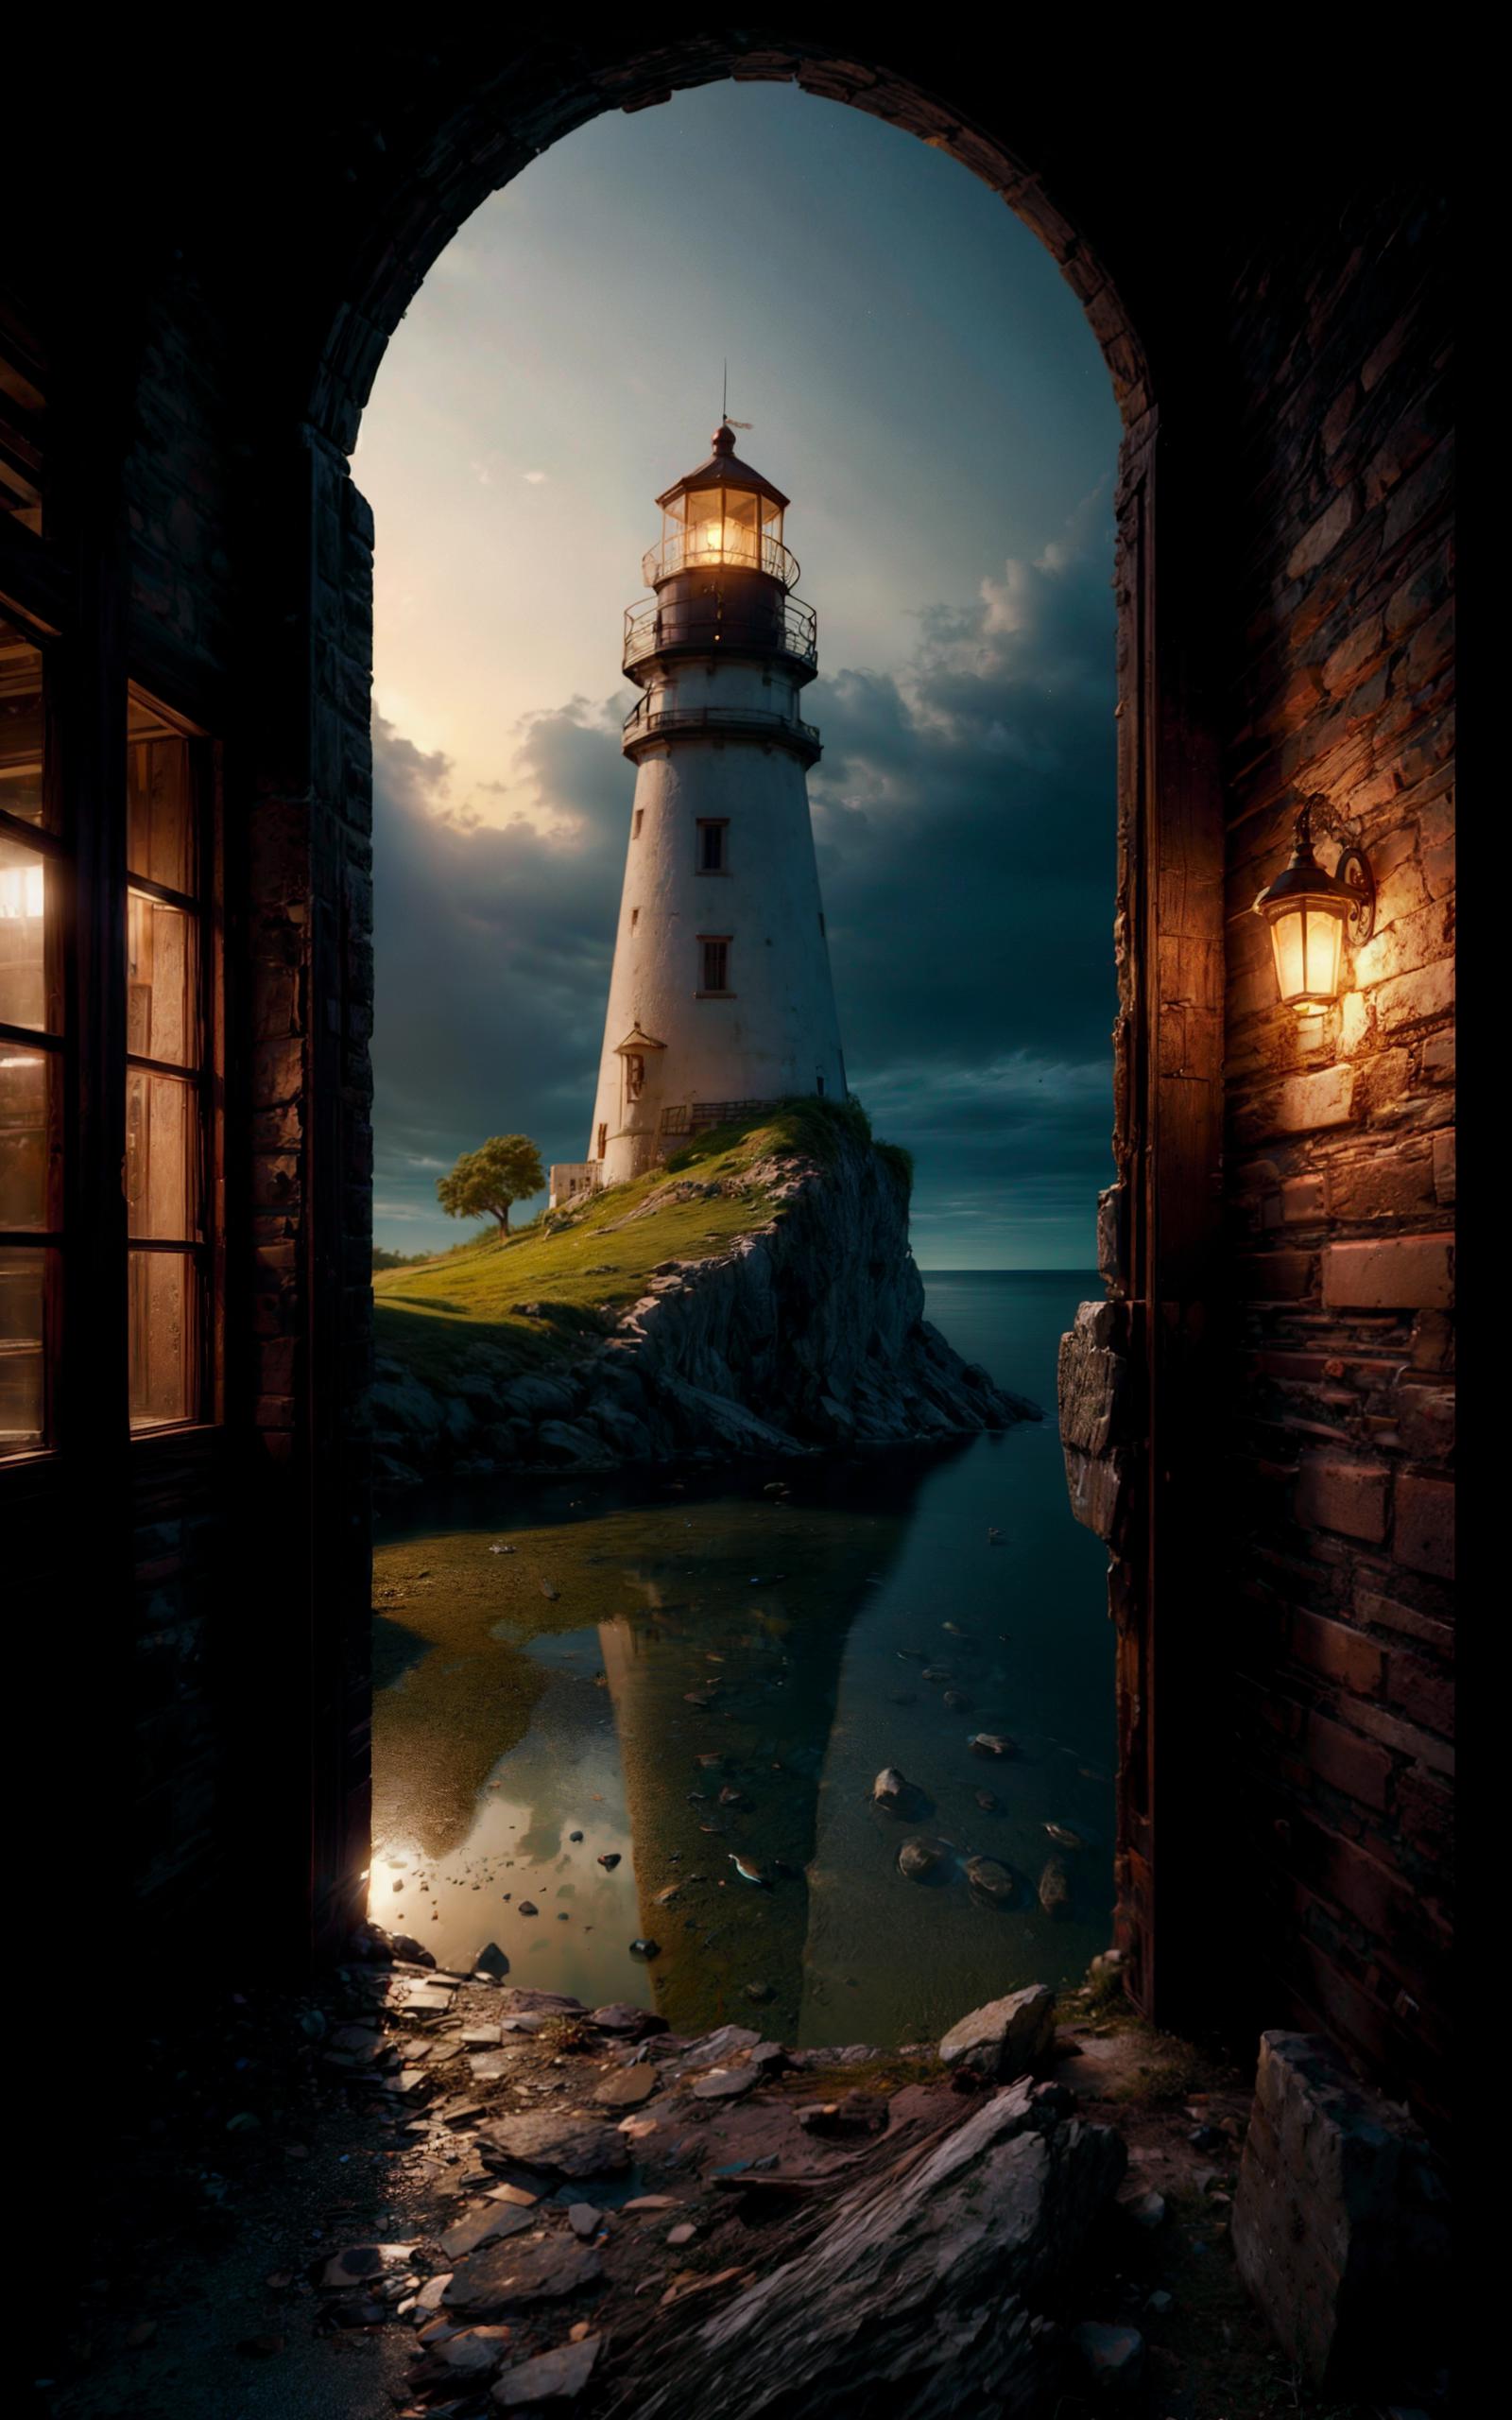 A Lighthouse on a Rocky Hillside with a Dark Sky and Reflection in the Water.